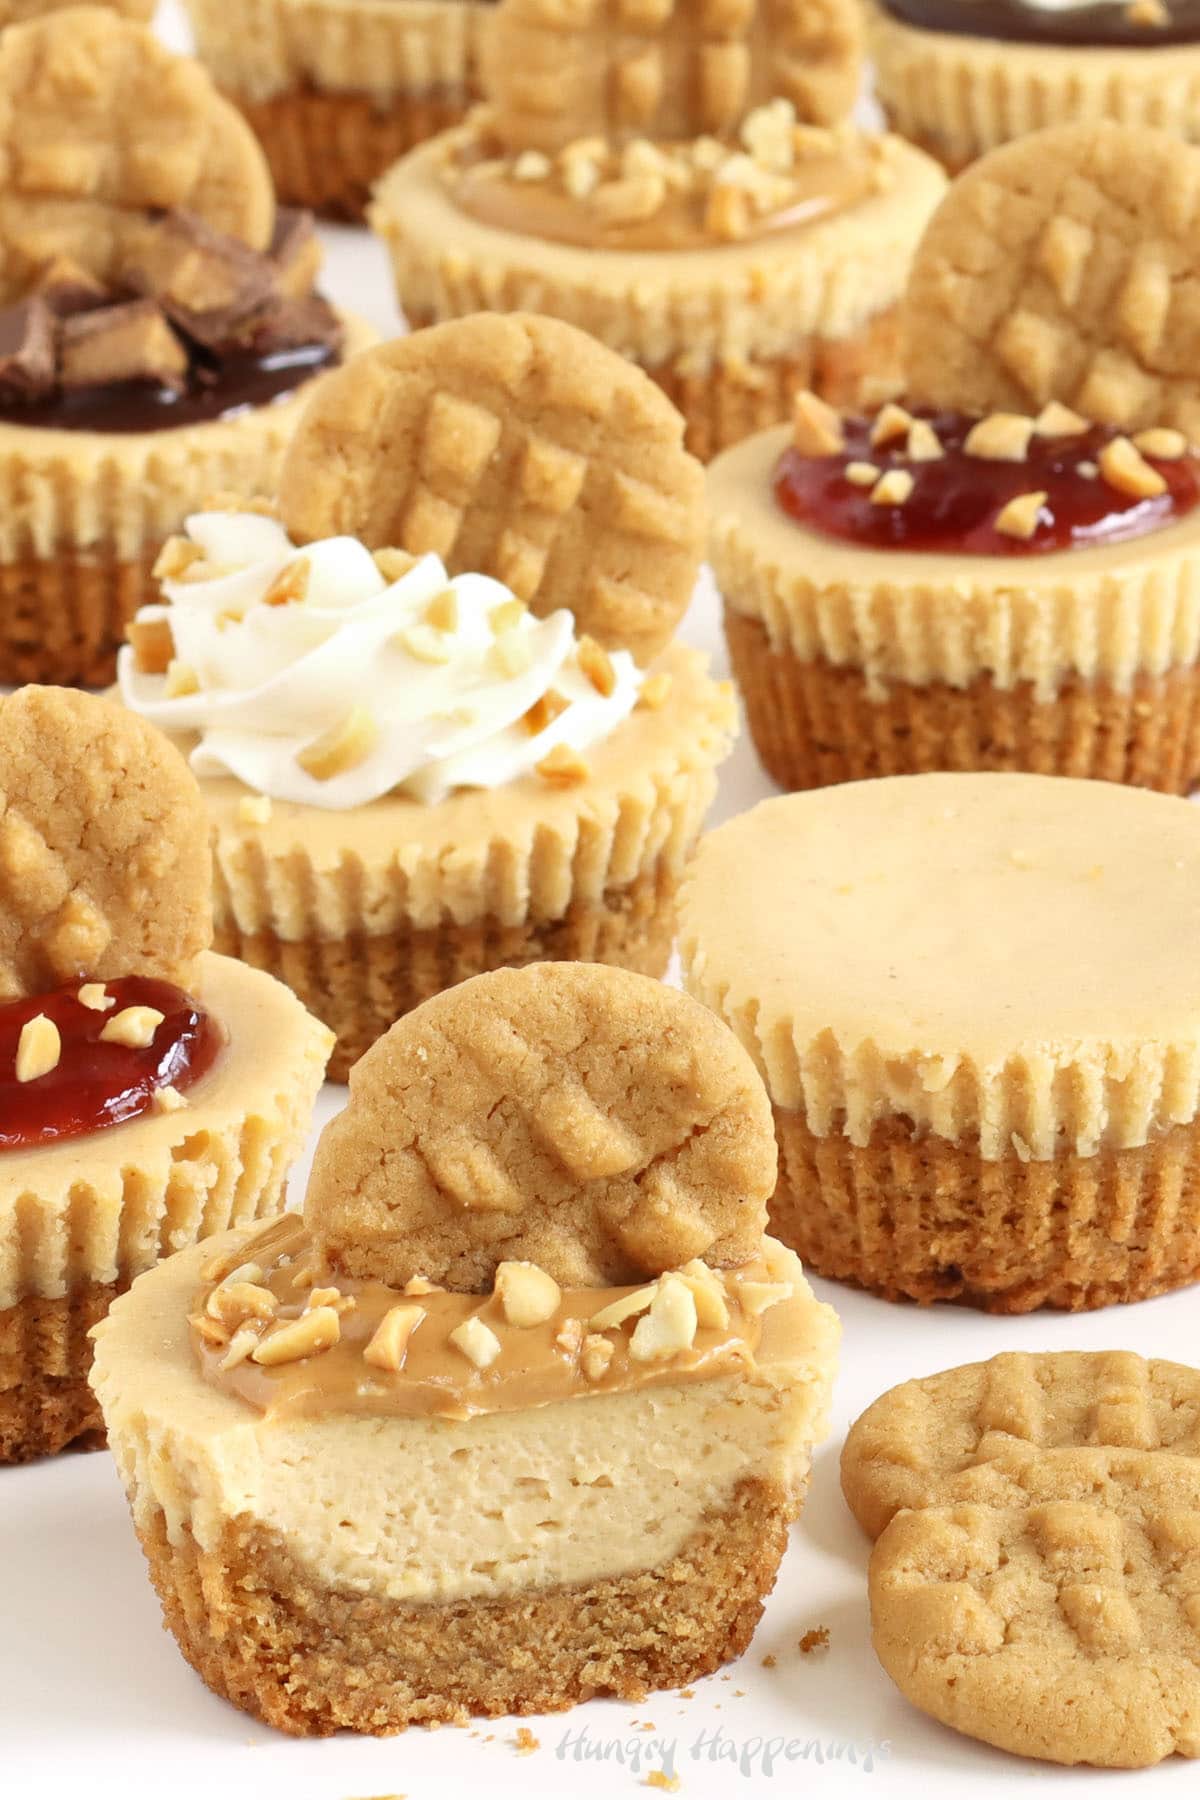 Mini peanut butter cheesecakes plain and topped with peanut butter, whipped cream, jelly, and chocolate ganache.